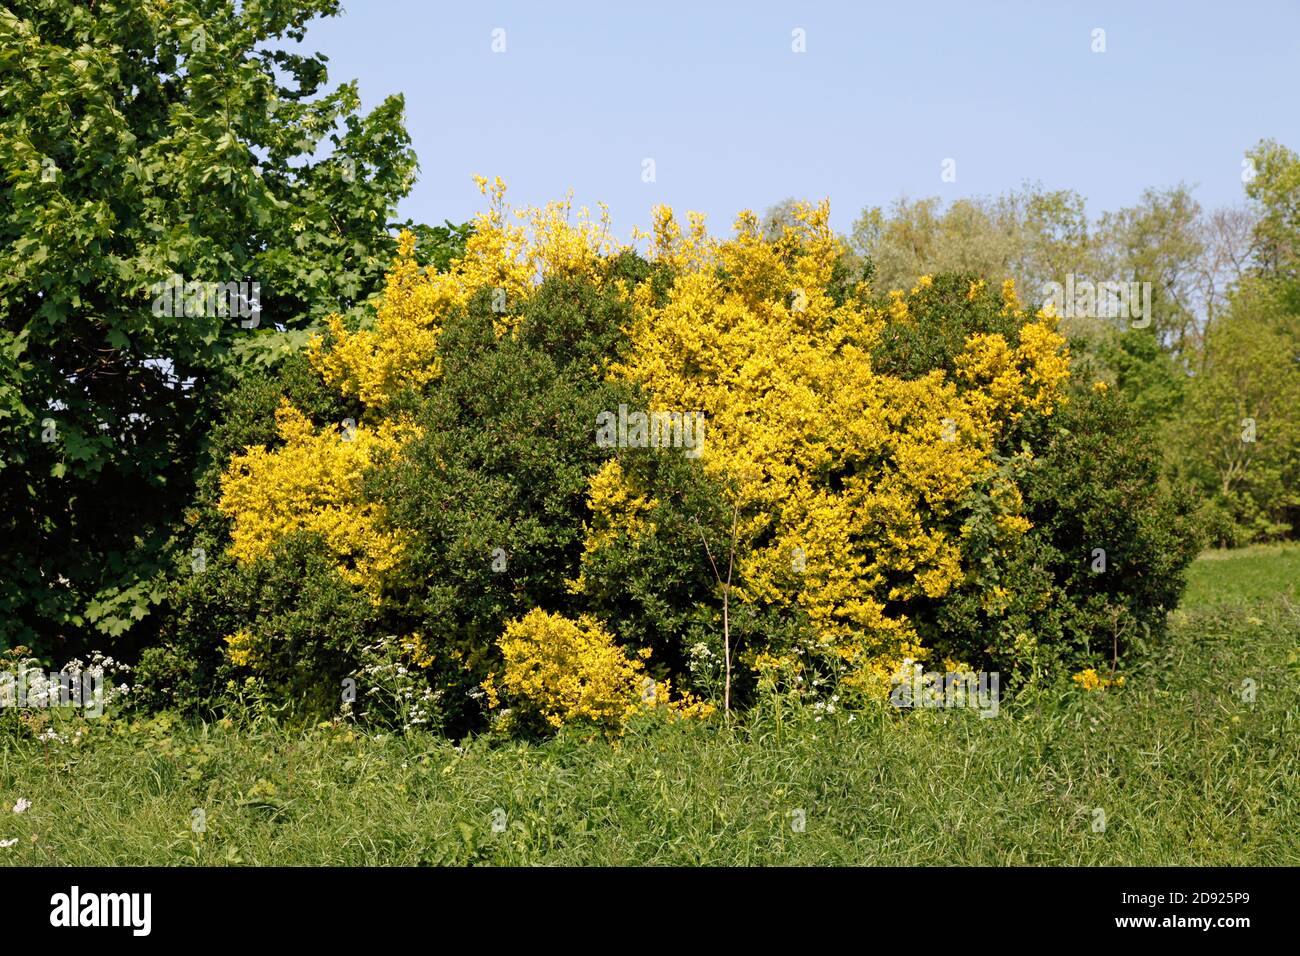 Heavy, dense, established Forsythia bush growing in the wild in a field, colour changing from green to yellow Stock Photo